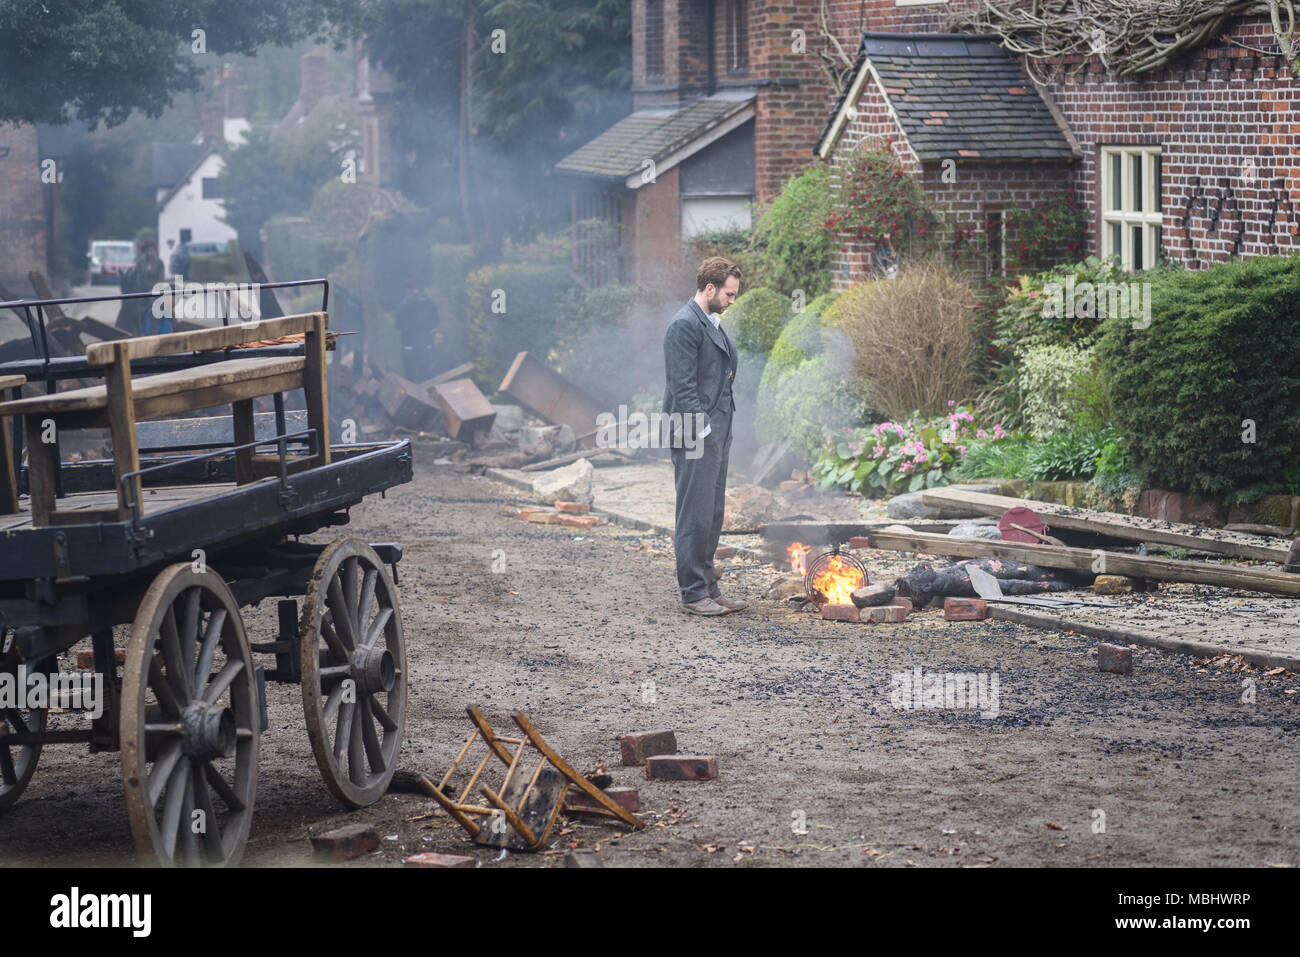 Great Budworth, UK. 11th April, 2018. Actor Rafe Spall dressed in Edwardian costume, playing the lead role of George, looks on at the carnage in the new BBC drama 'War Of The Worlds' by HG Wells, filmed in the streets of Great Budworth village, Cheshire on Wednesday afternoon, April 11th. Credit: Ian Hubball/Alamy Live News Stock Photo